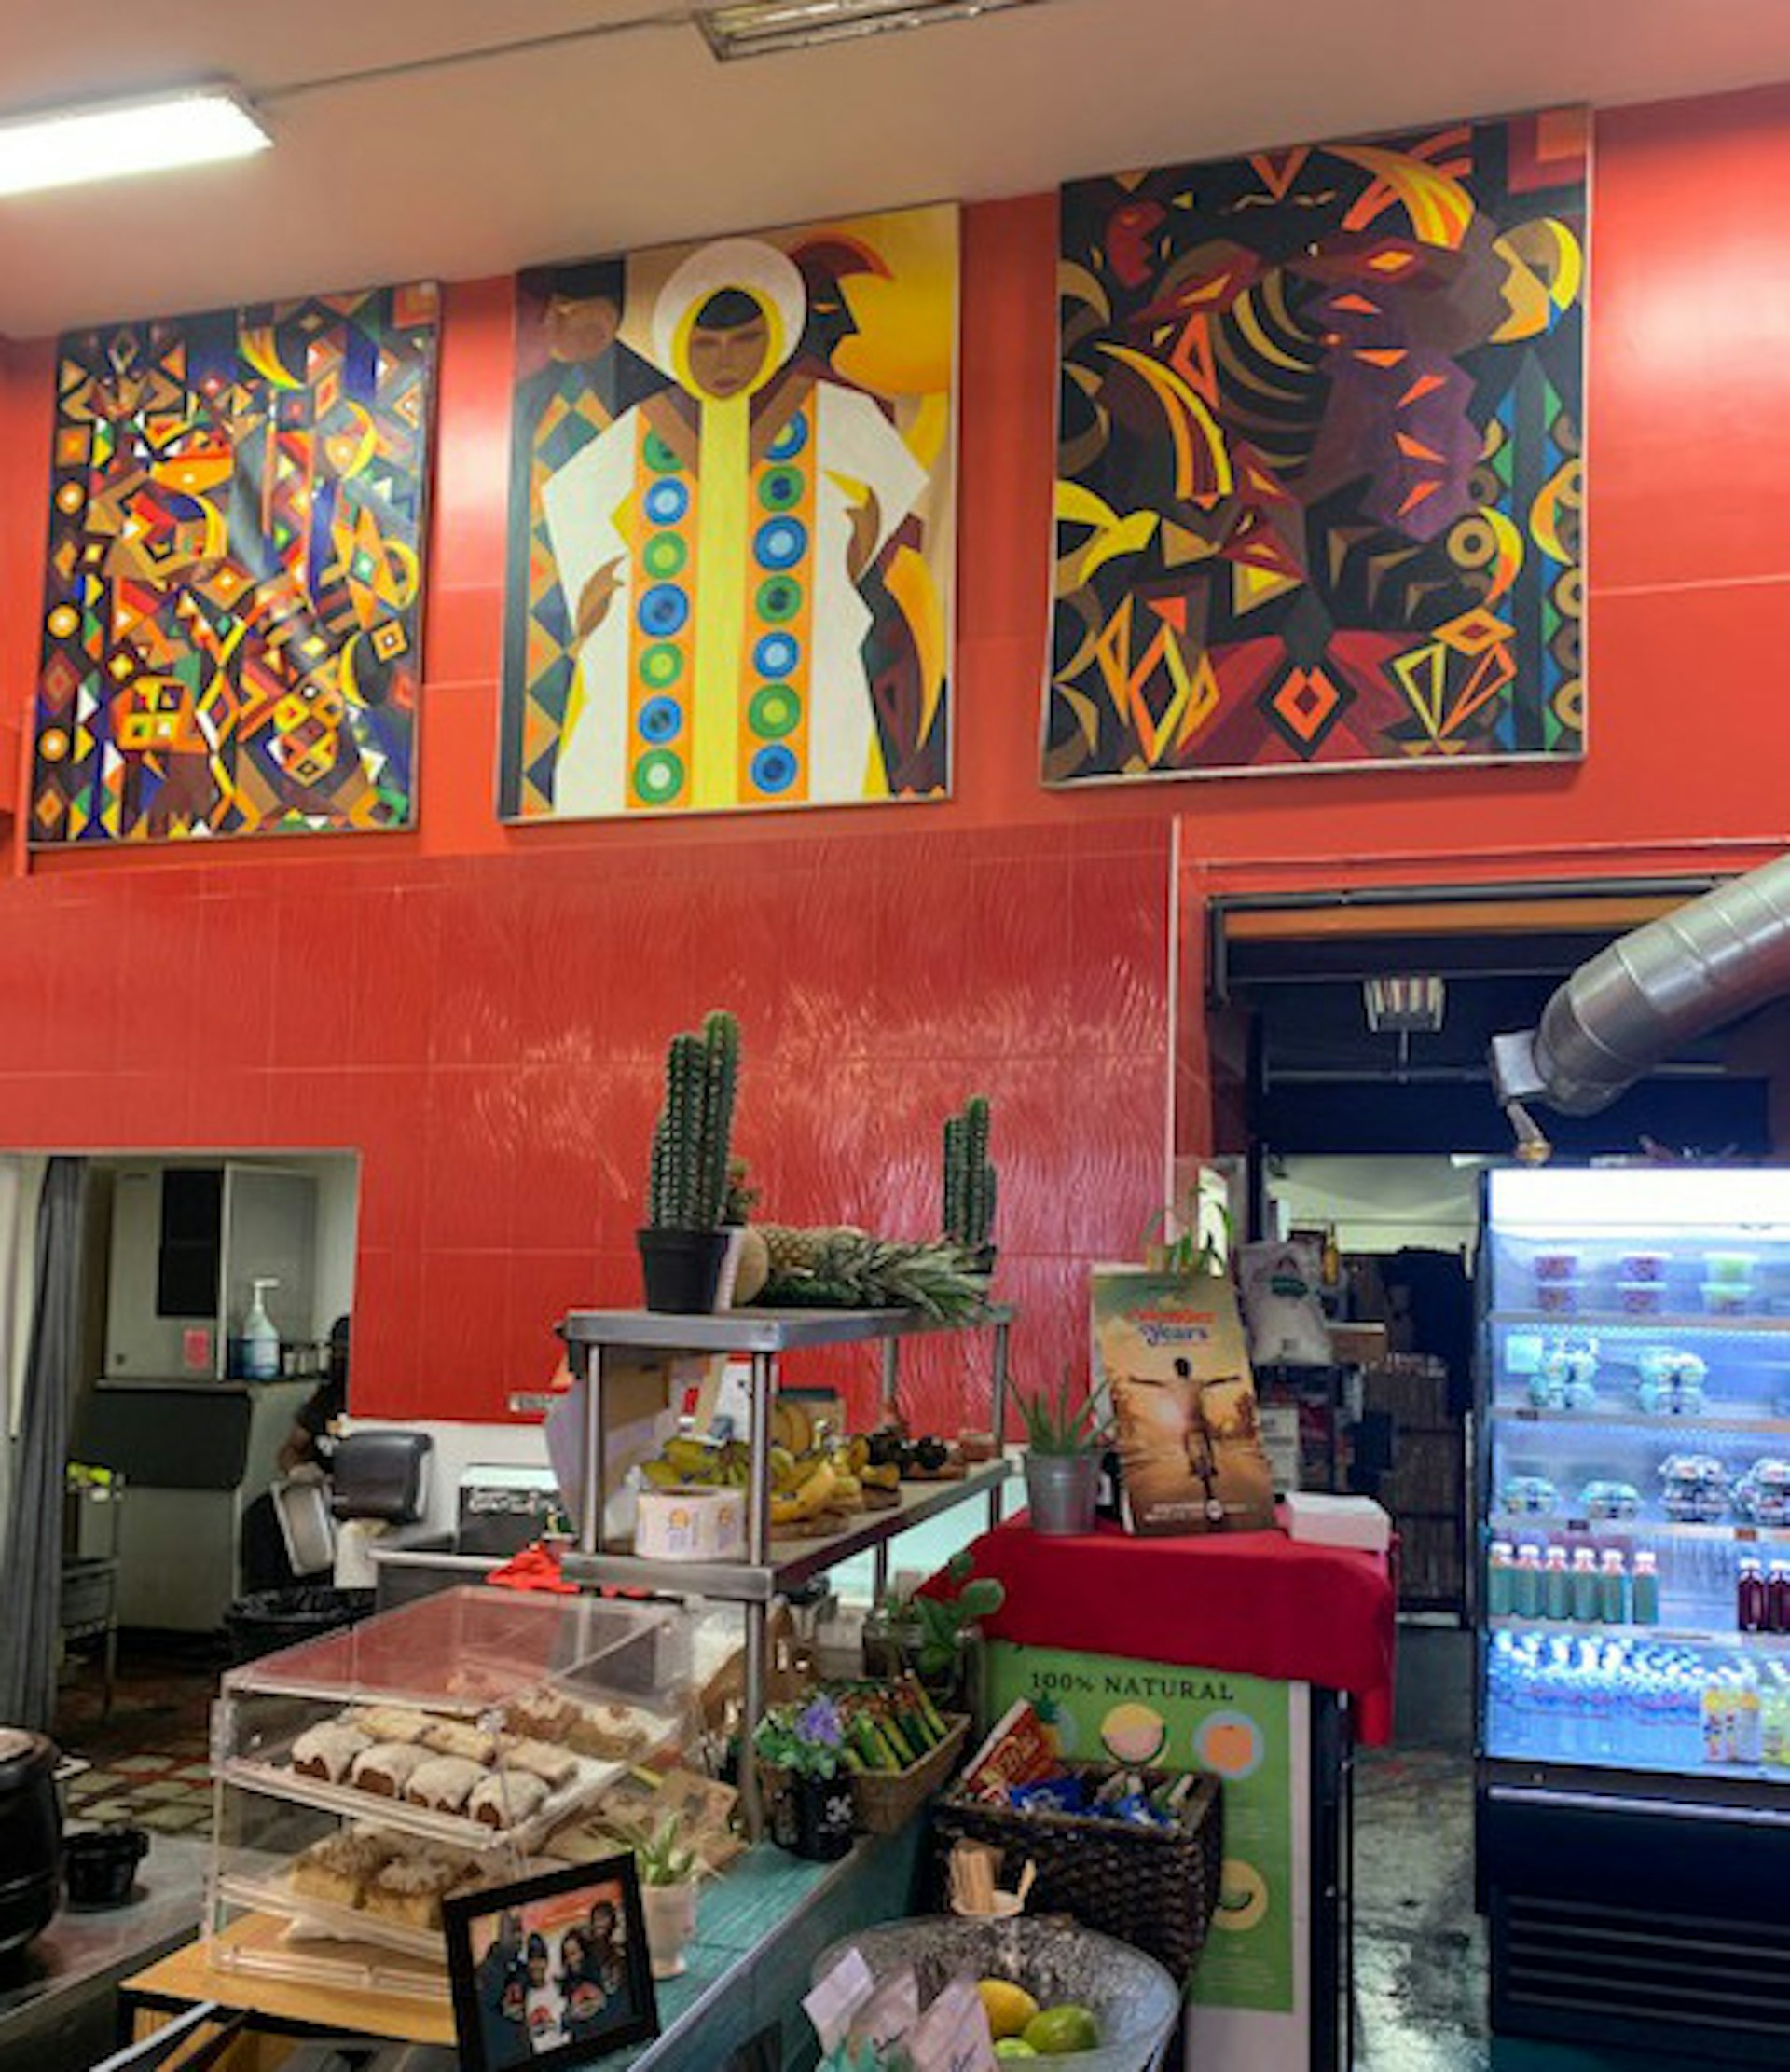 Interior shot of the Hot and Cool Cafe in Leimert Park. A trio of colorful paintings hang on the red wall. The counters are filled with sweet treats and fruits and off to the left is a refrigerator. 